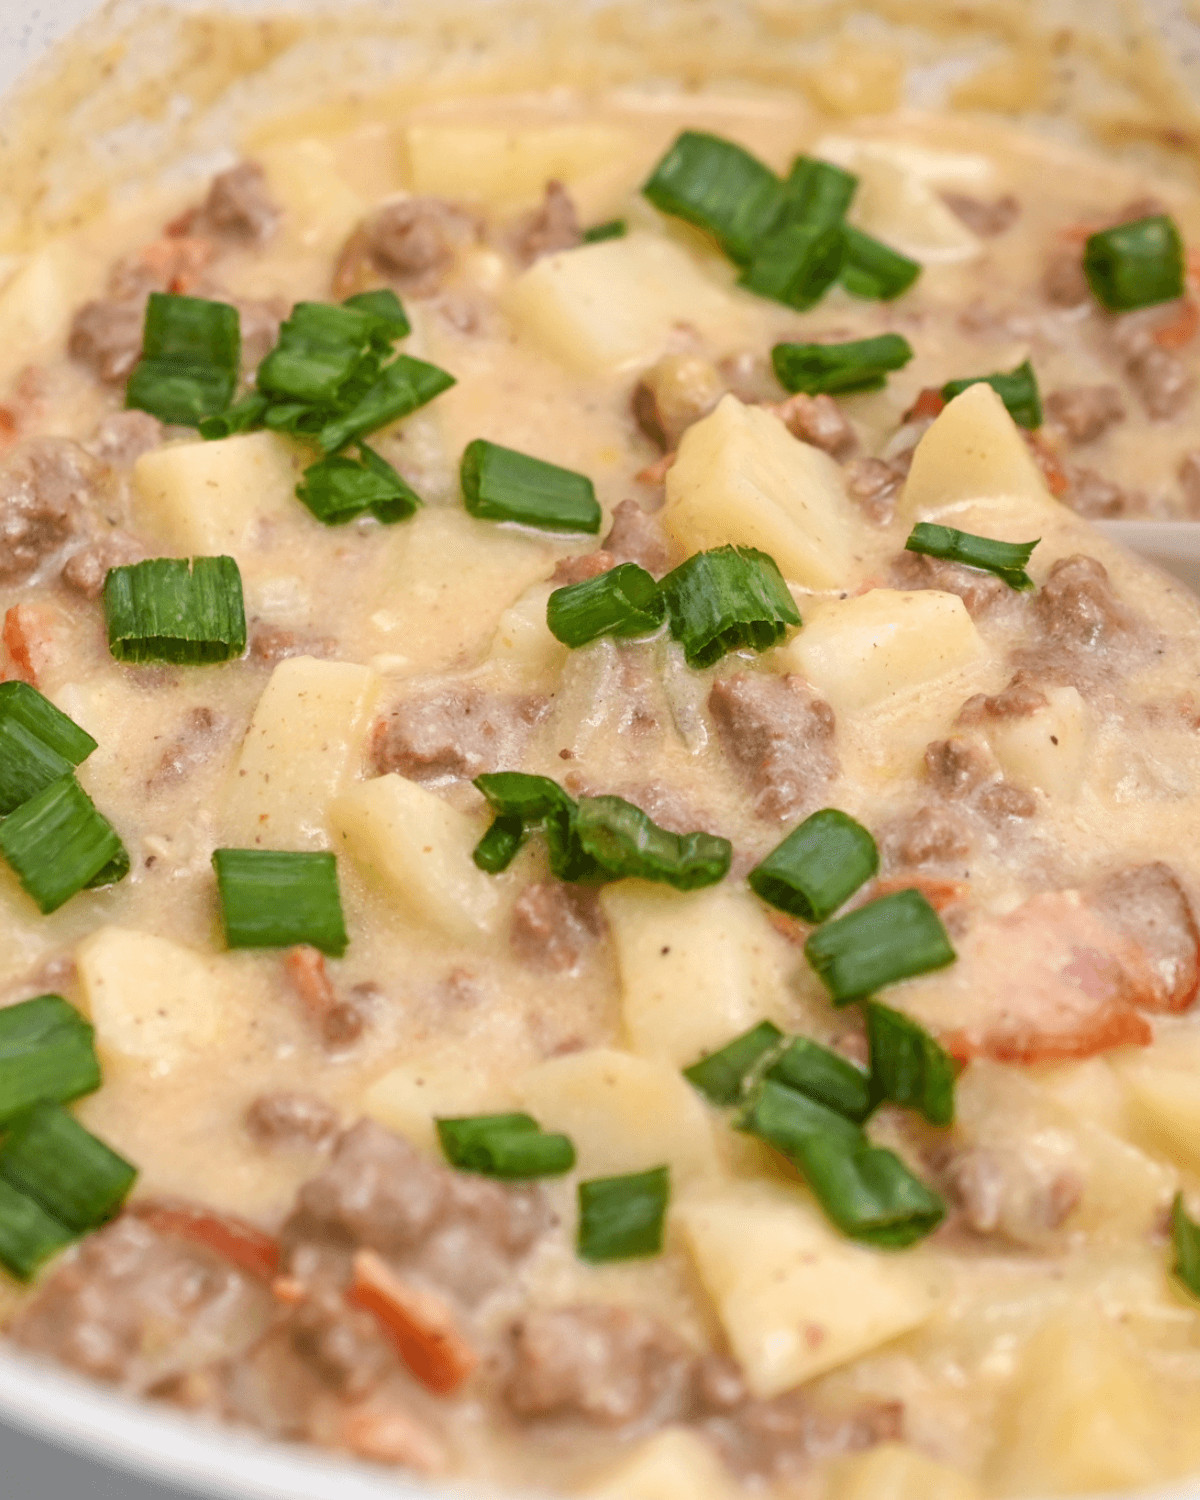 Cheesy ground meat and  vegetables topped with green onions.